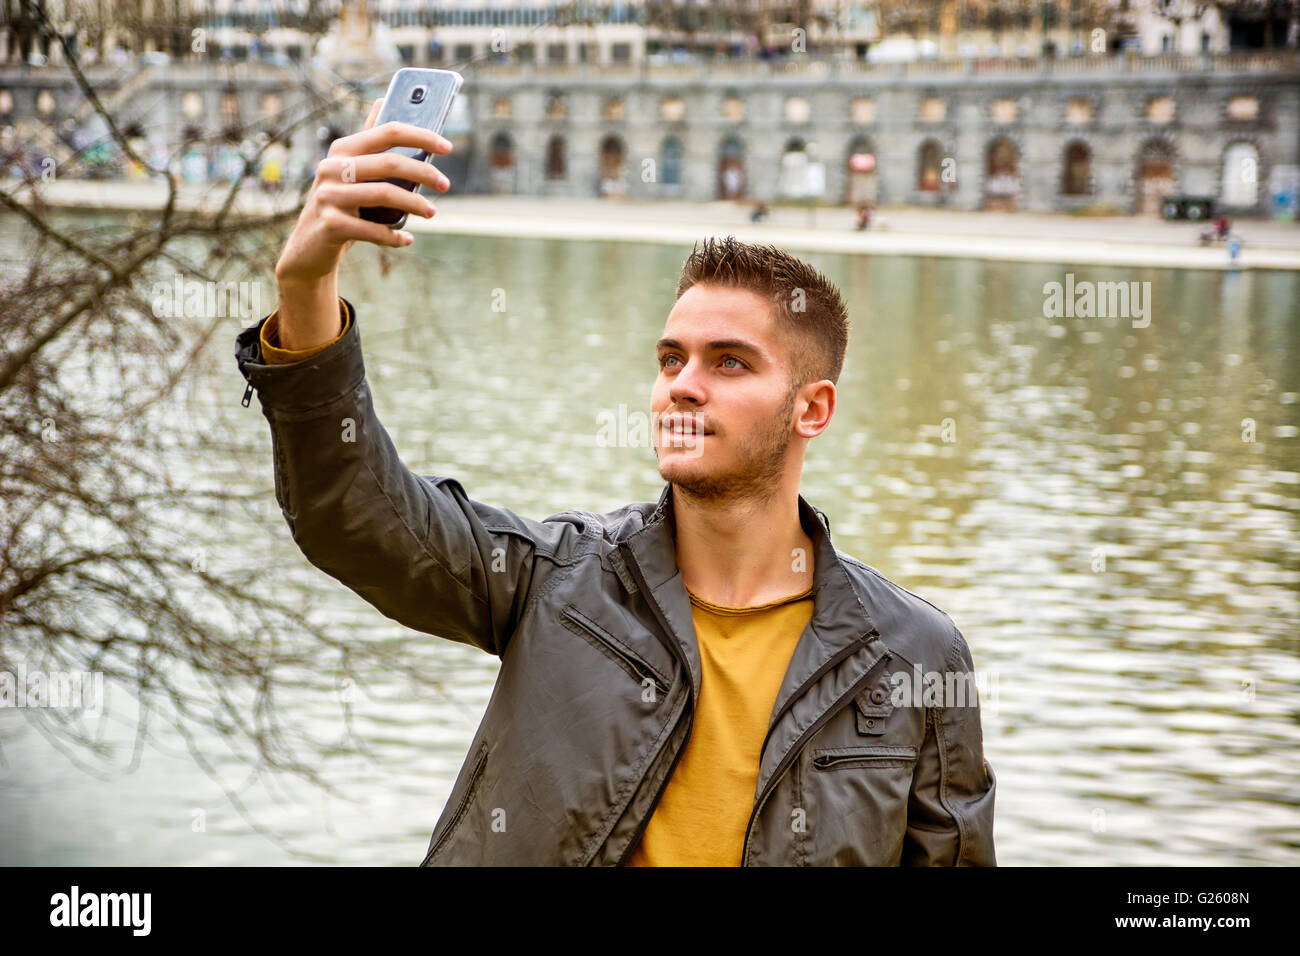 Three-quarter length of light brown haired young man wearing grey jacket and denim jeans taking selfie photo with his smartphone Stock Photo